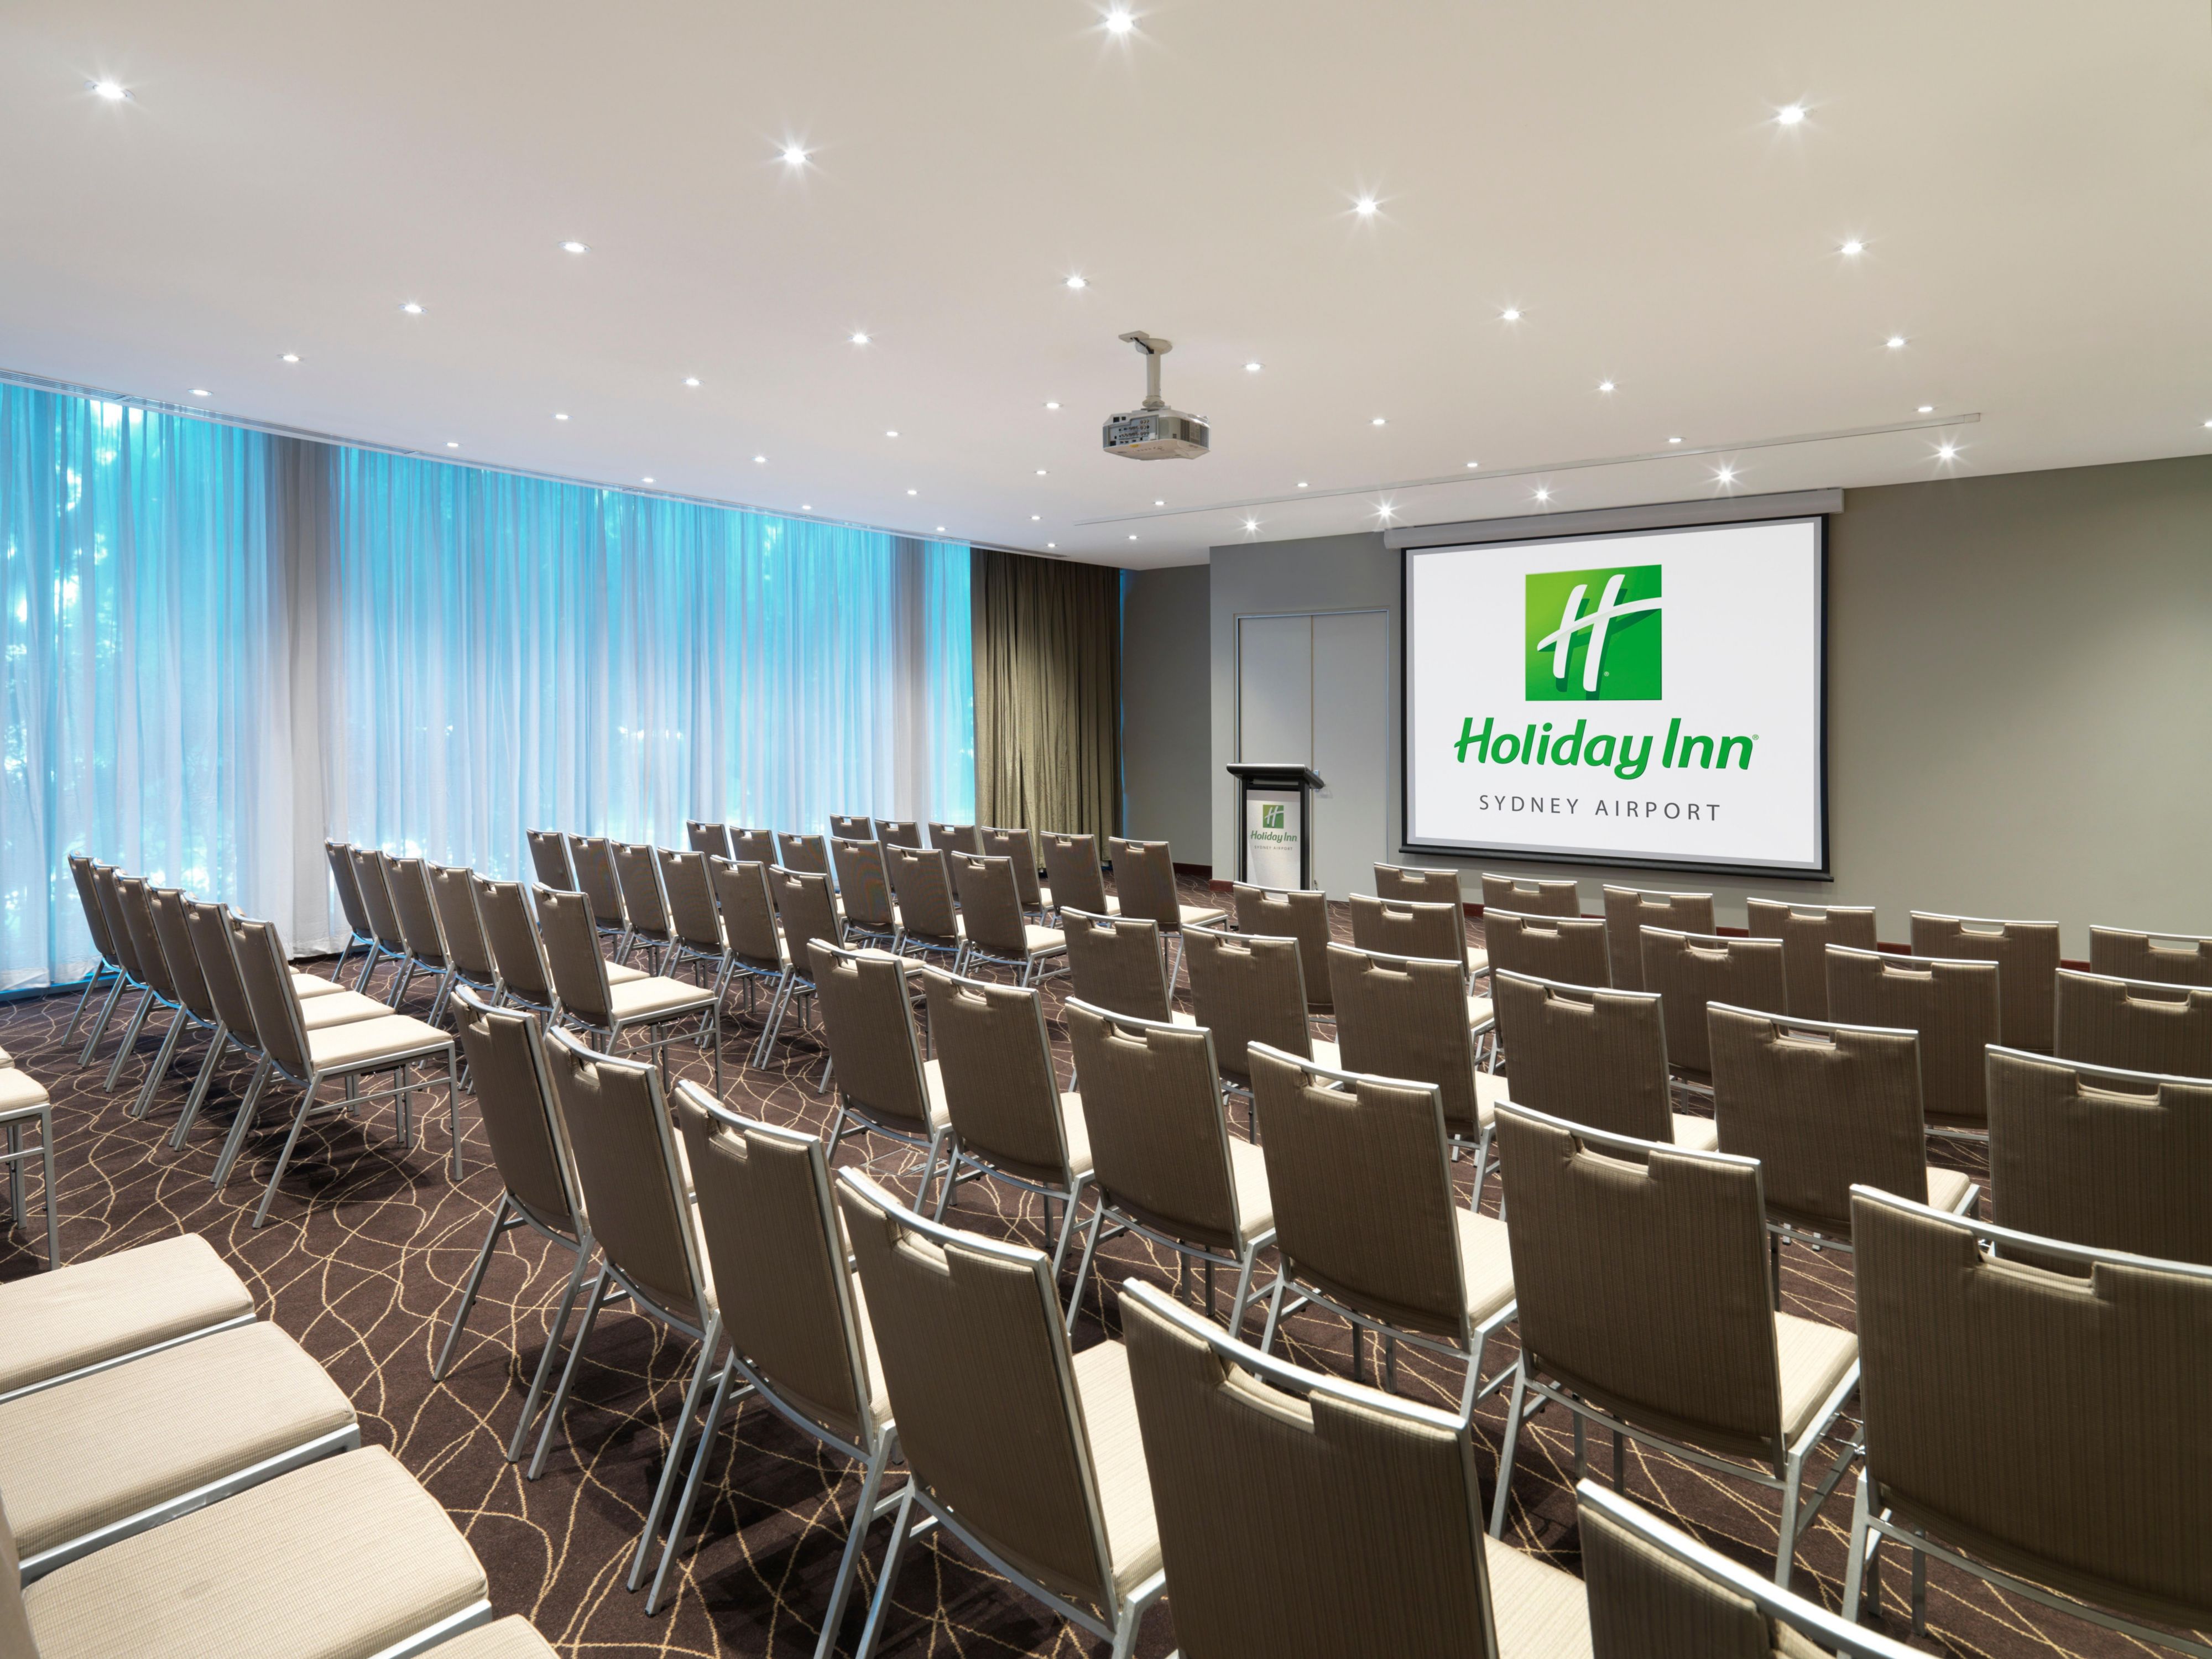 Hold your next meeting or event at Holiday Inn Sydney Airport and take advantage of our pillarless spaces and natural sunlight. With our location being 400 meters away from the train station, it makes getting to our hotel easy. We are the small meeting specialists and can play host to 6 to 90 people. 